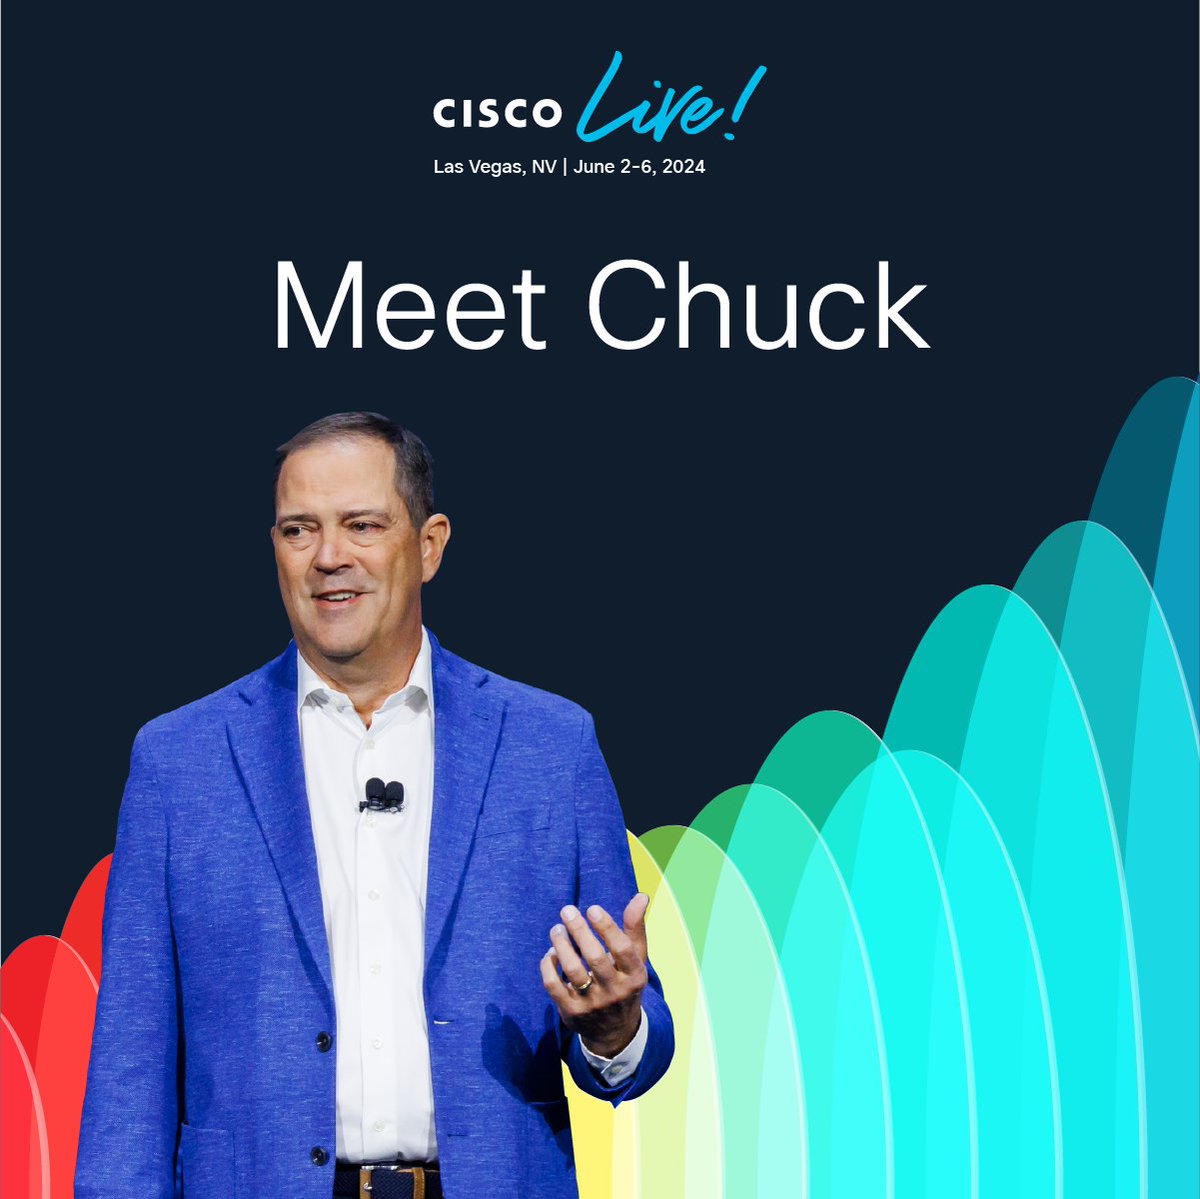 Stop. Enter for a chance to win. Strike a pose! 🕺📸 This year at #CiscoLive, you could have the opportunity to meet and take a photo with @ChuckRobbins. Get the terms and conditions here: cs.co/6012jsALm